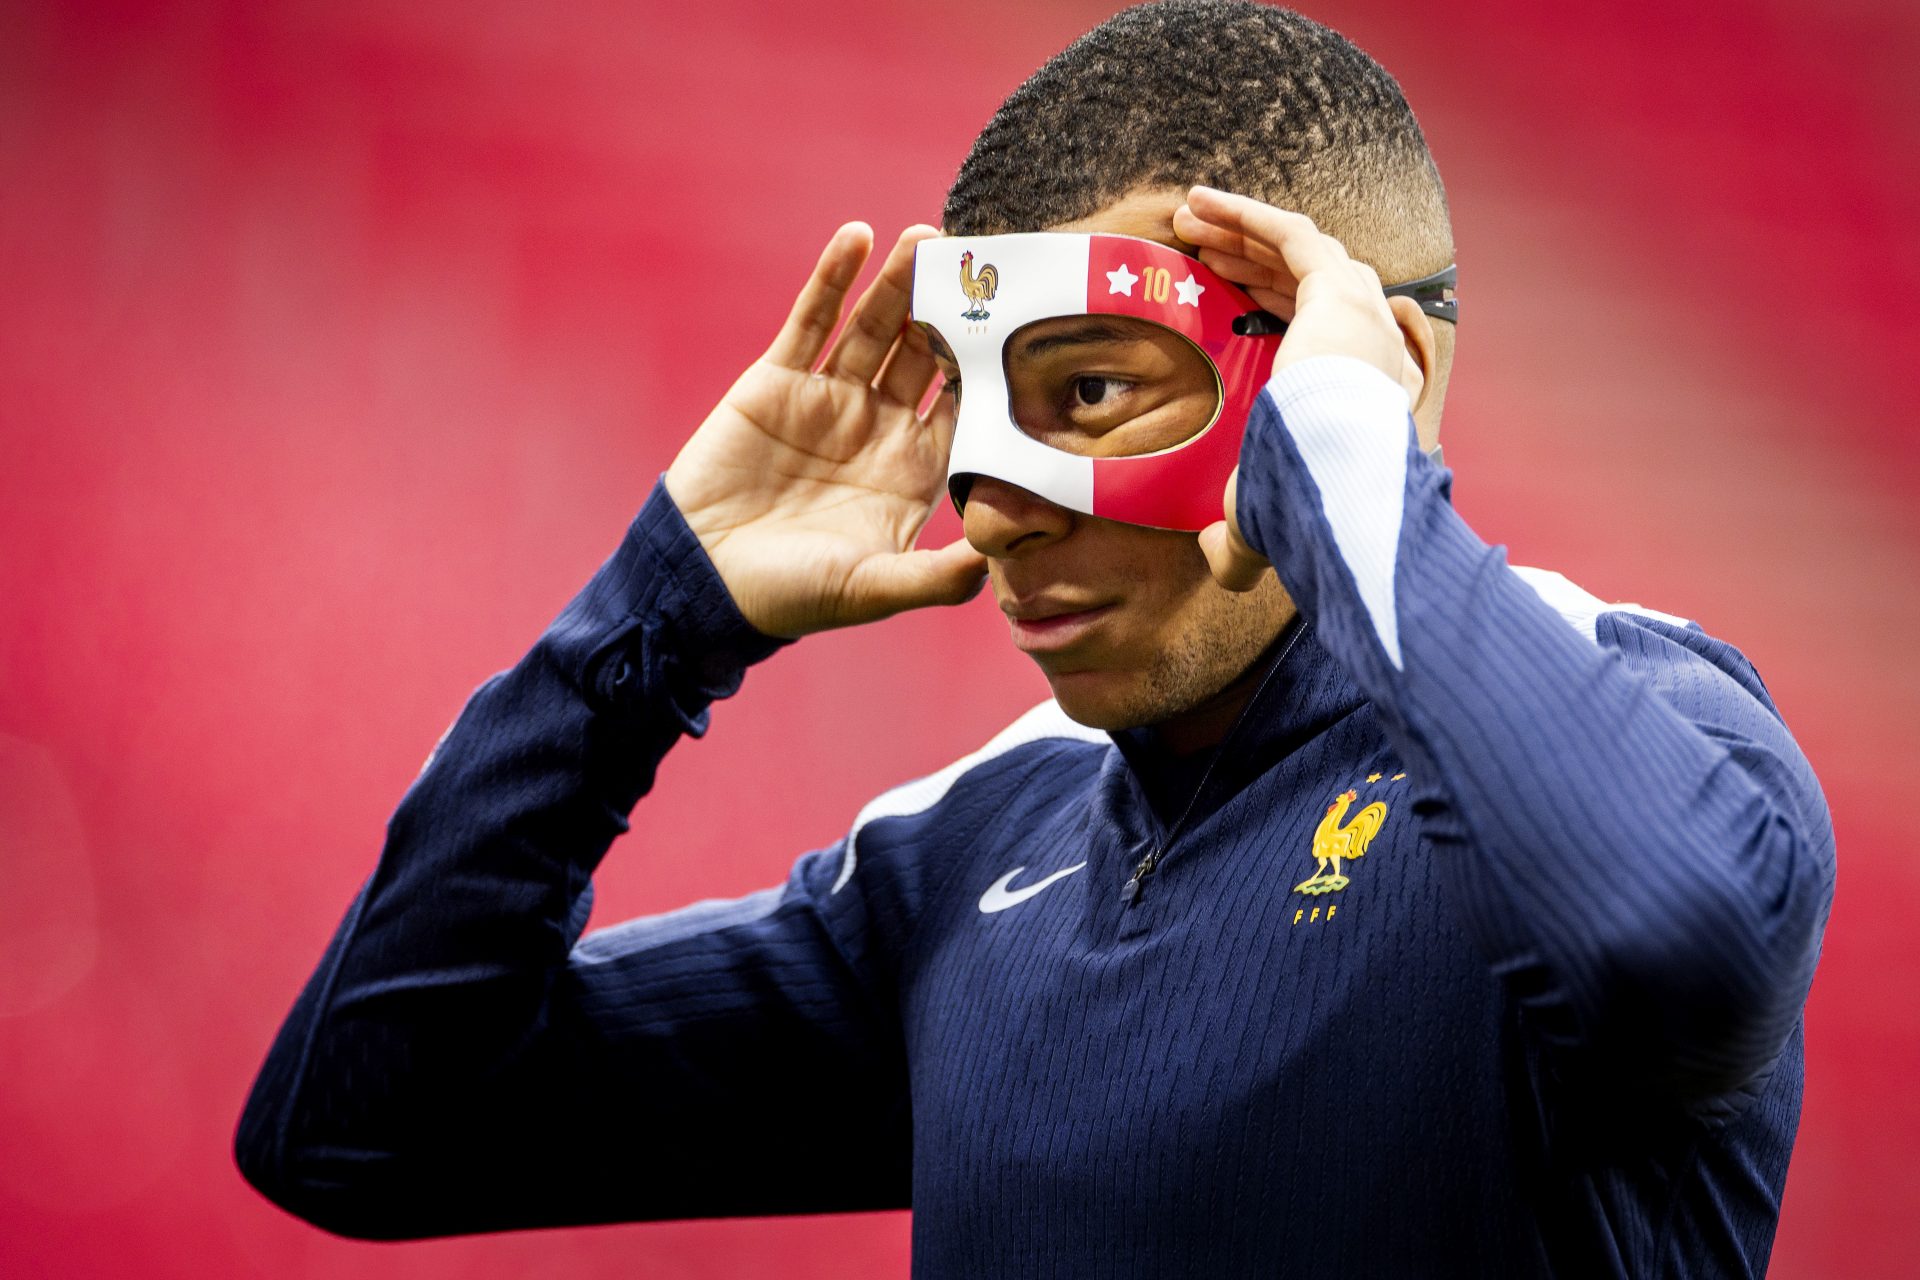 Kylian Mbappe and other football stars to wear a mask in football